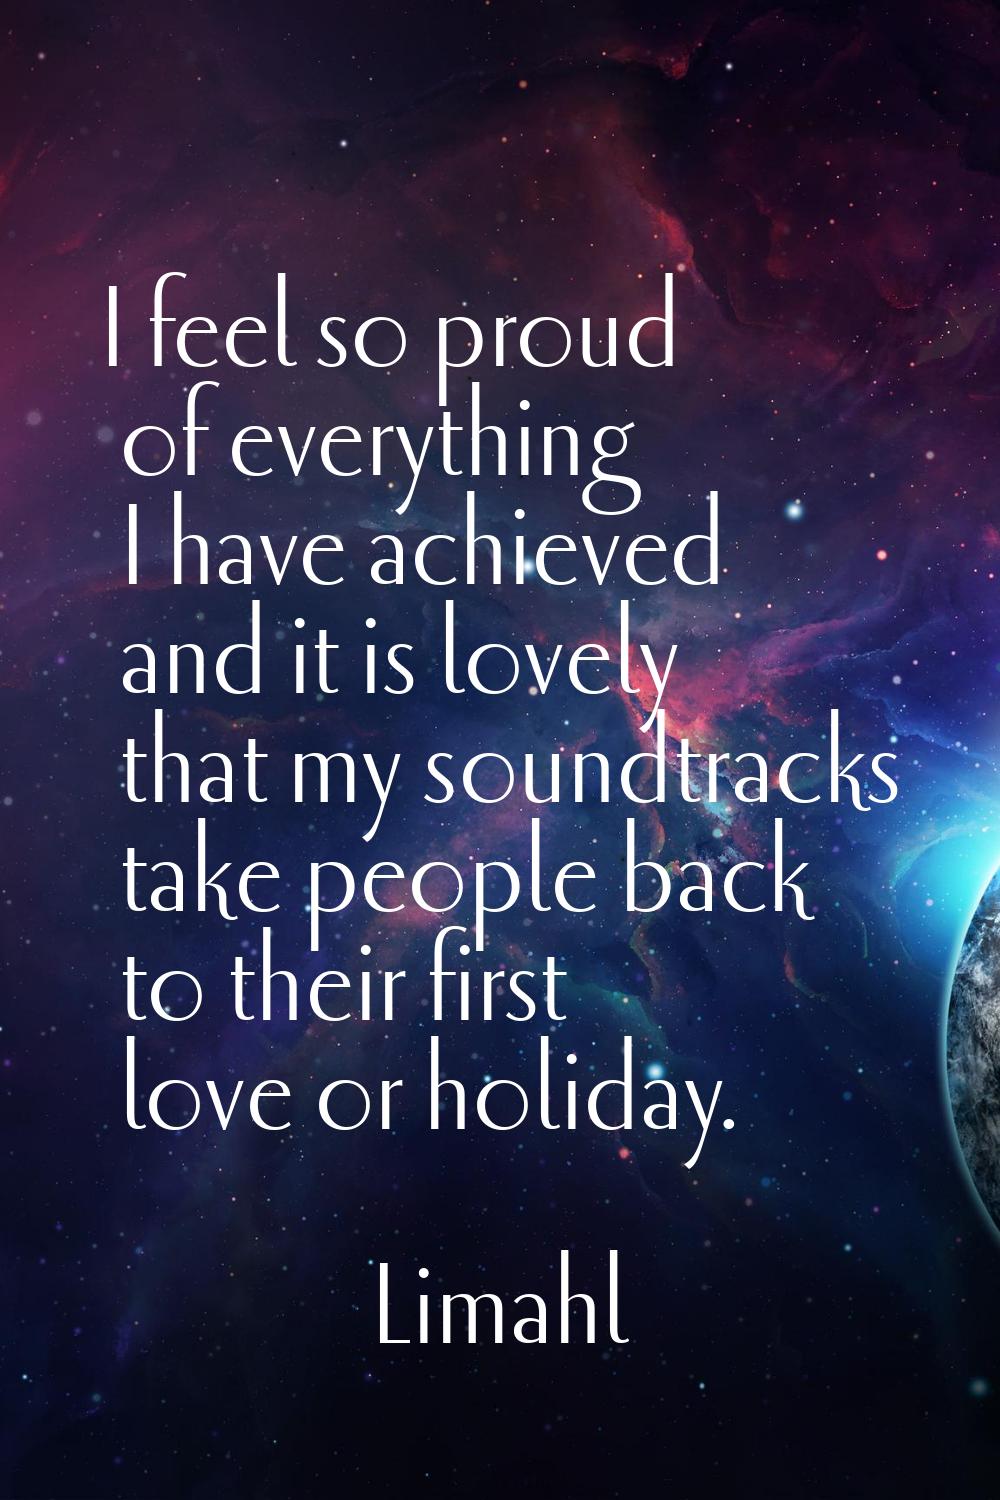 I feel so proud of everything I have achieved and it is lovely that my soundtracks take people back